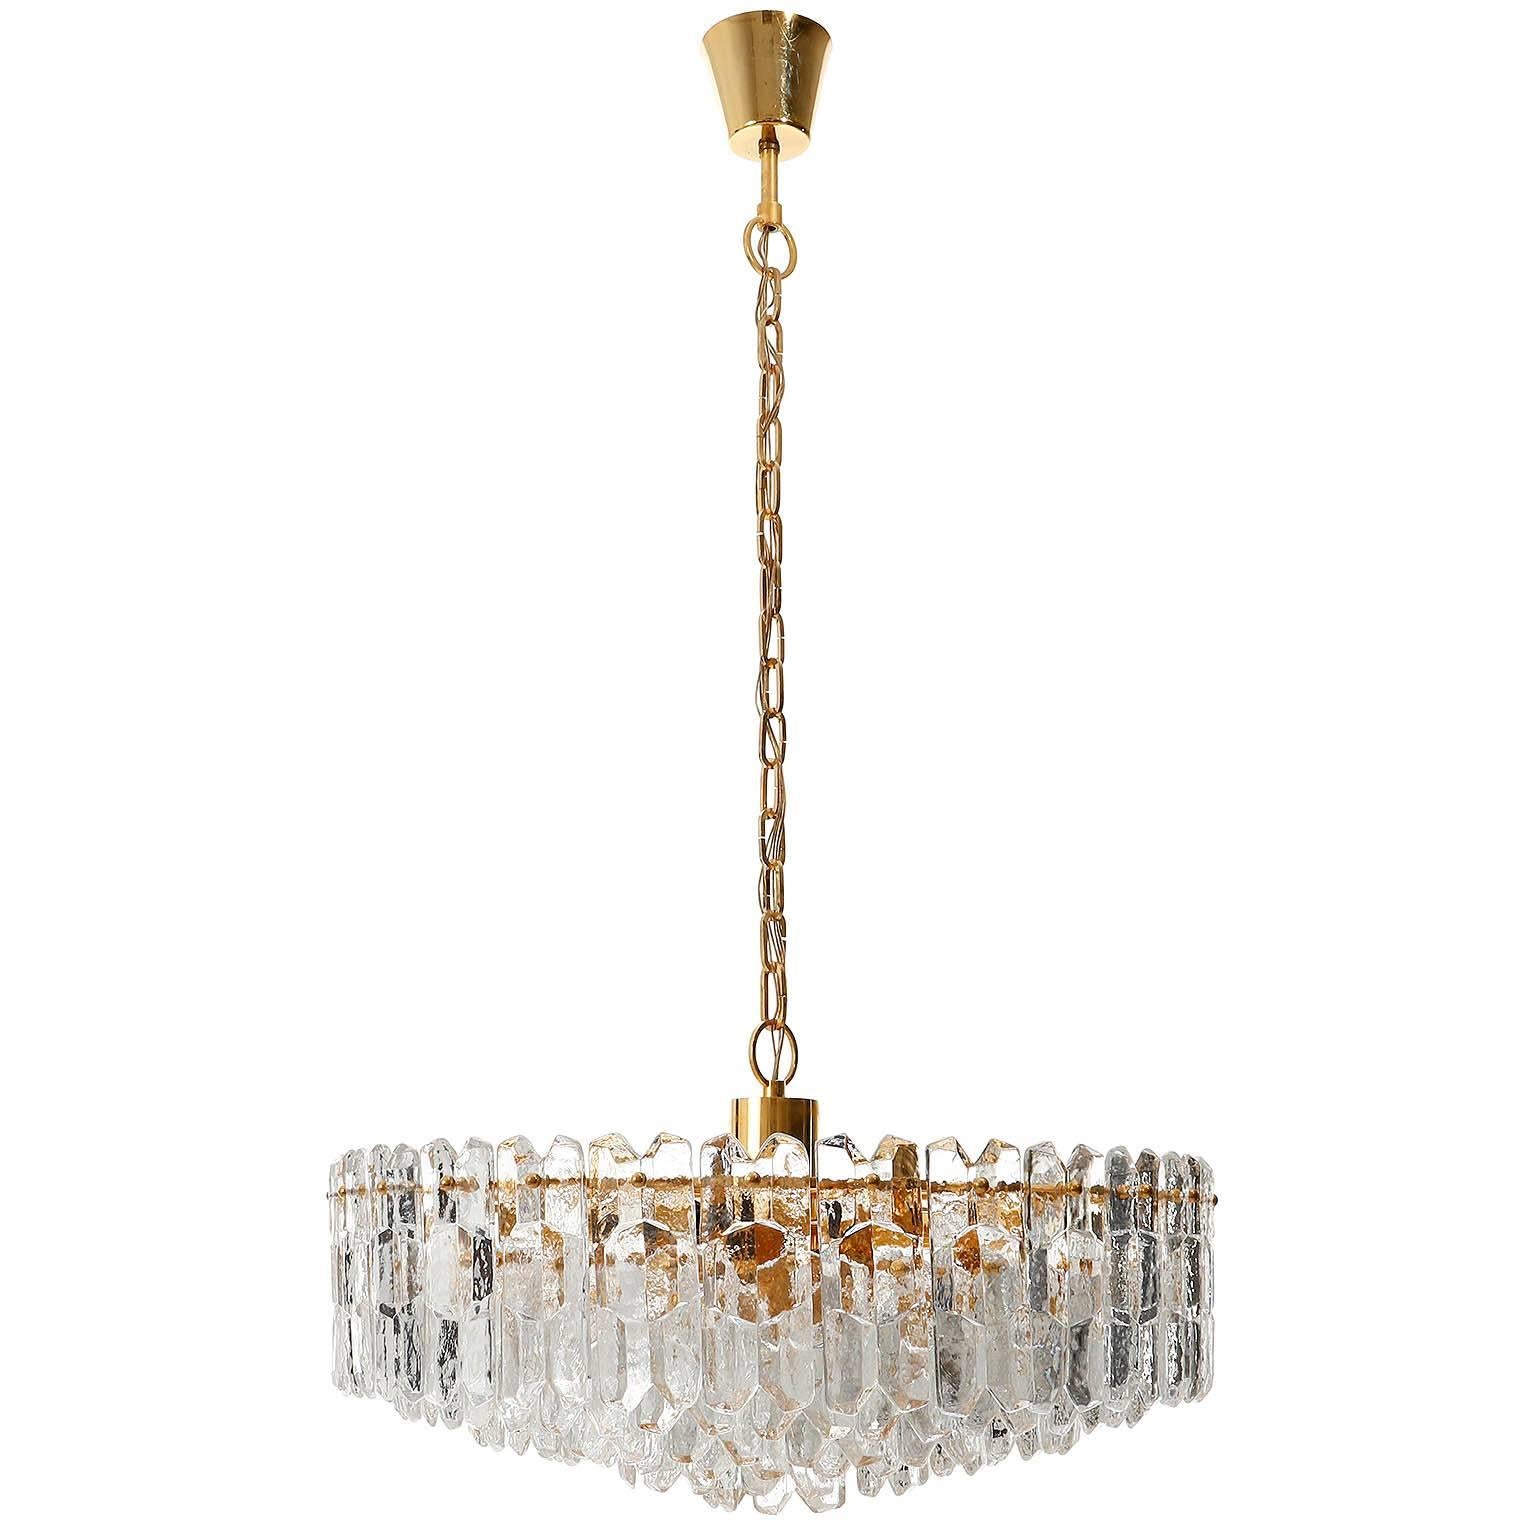 One of two grand and very exquisit 24-carat gold-plated brass and clear brillant glass 'Palazzo' light fixture by J.T. Kalmar, Vienna, Austria, manufactured in circa 1970 (late 1960s and early 1970s). 
Labeled and documented in the Kalmar catalogues